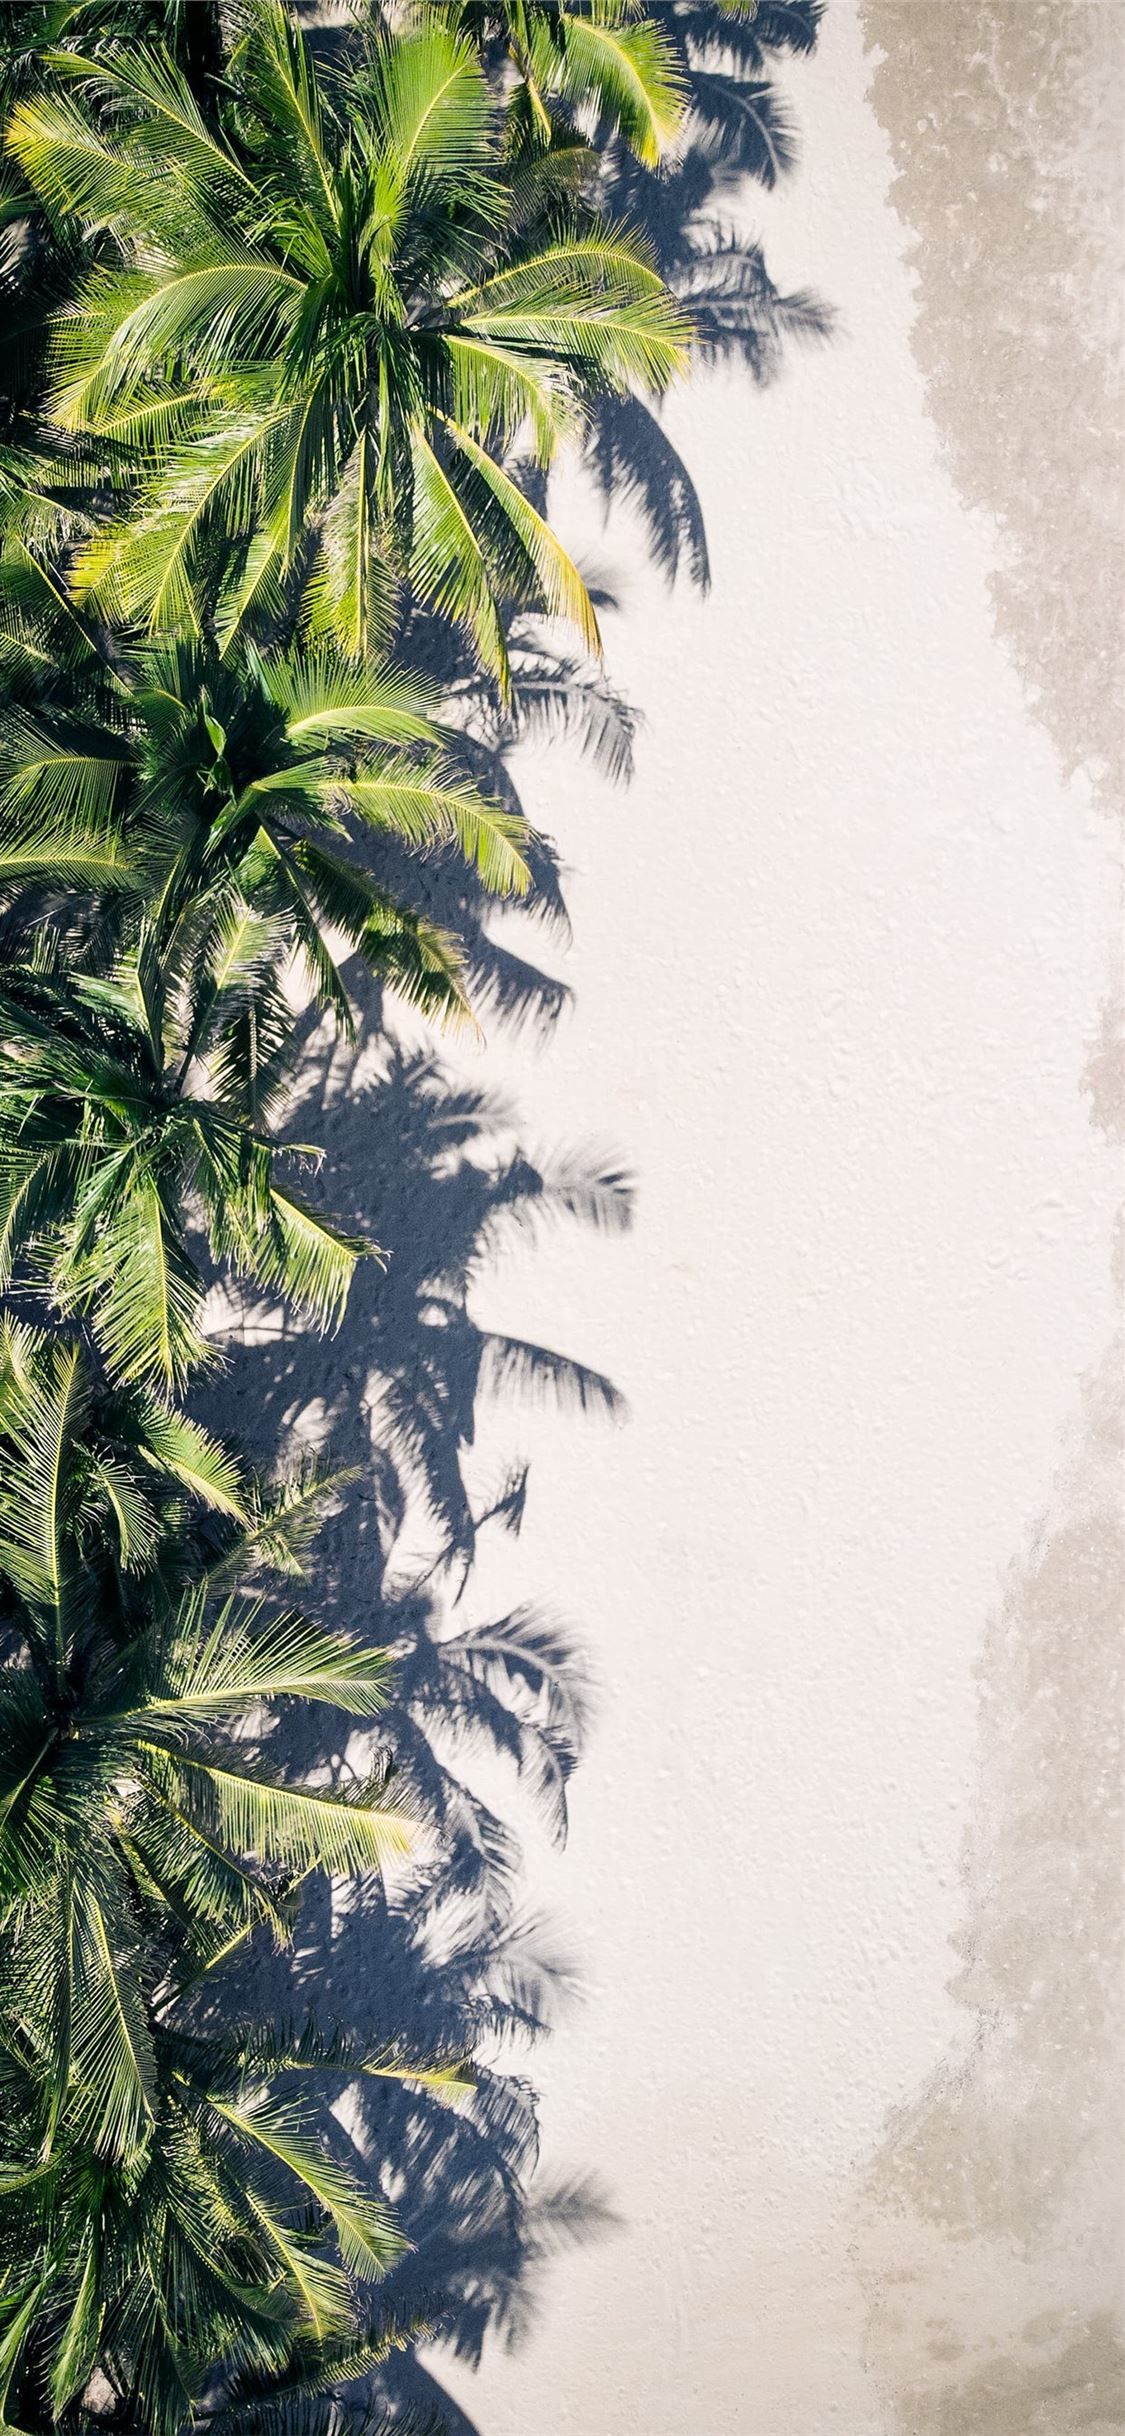 Coconut Palm Trees iPhone Wallpaper